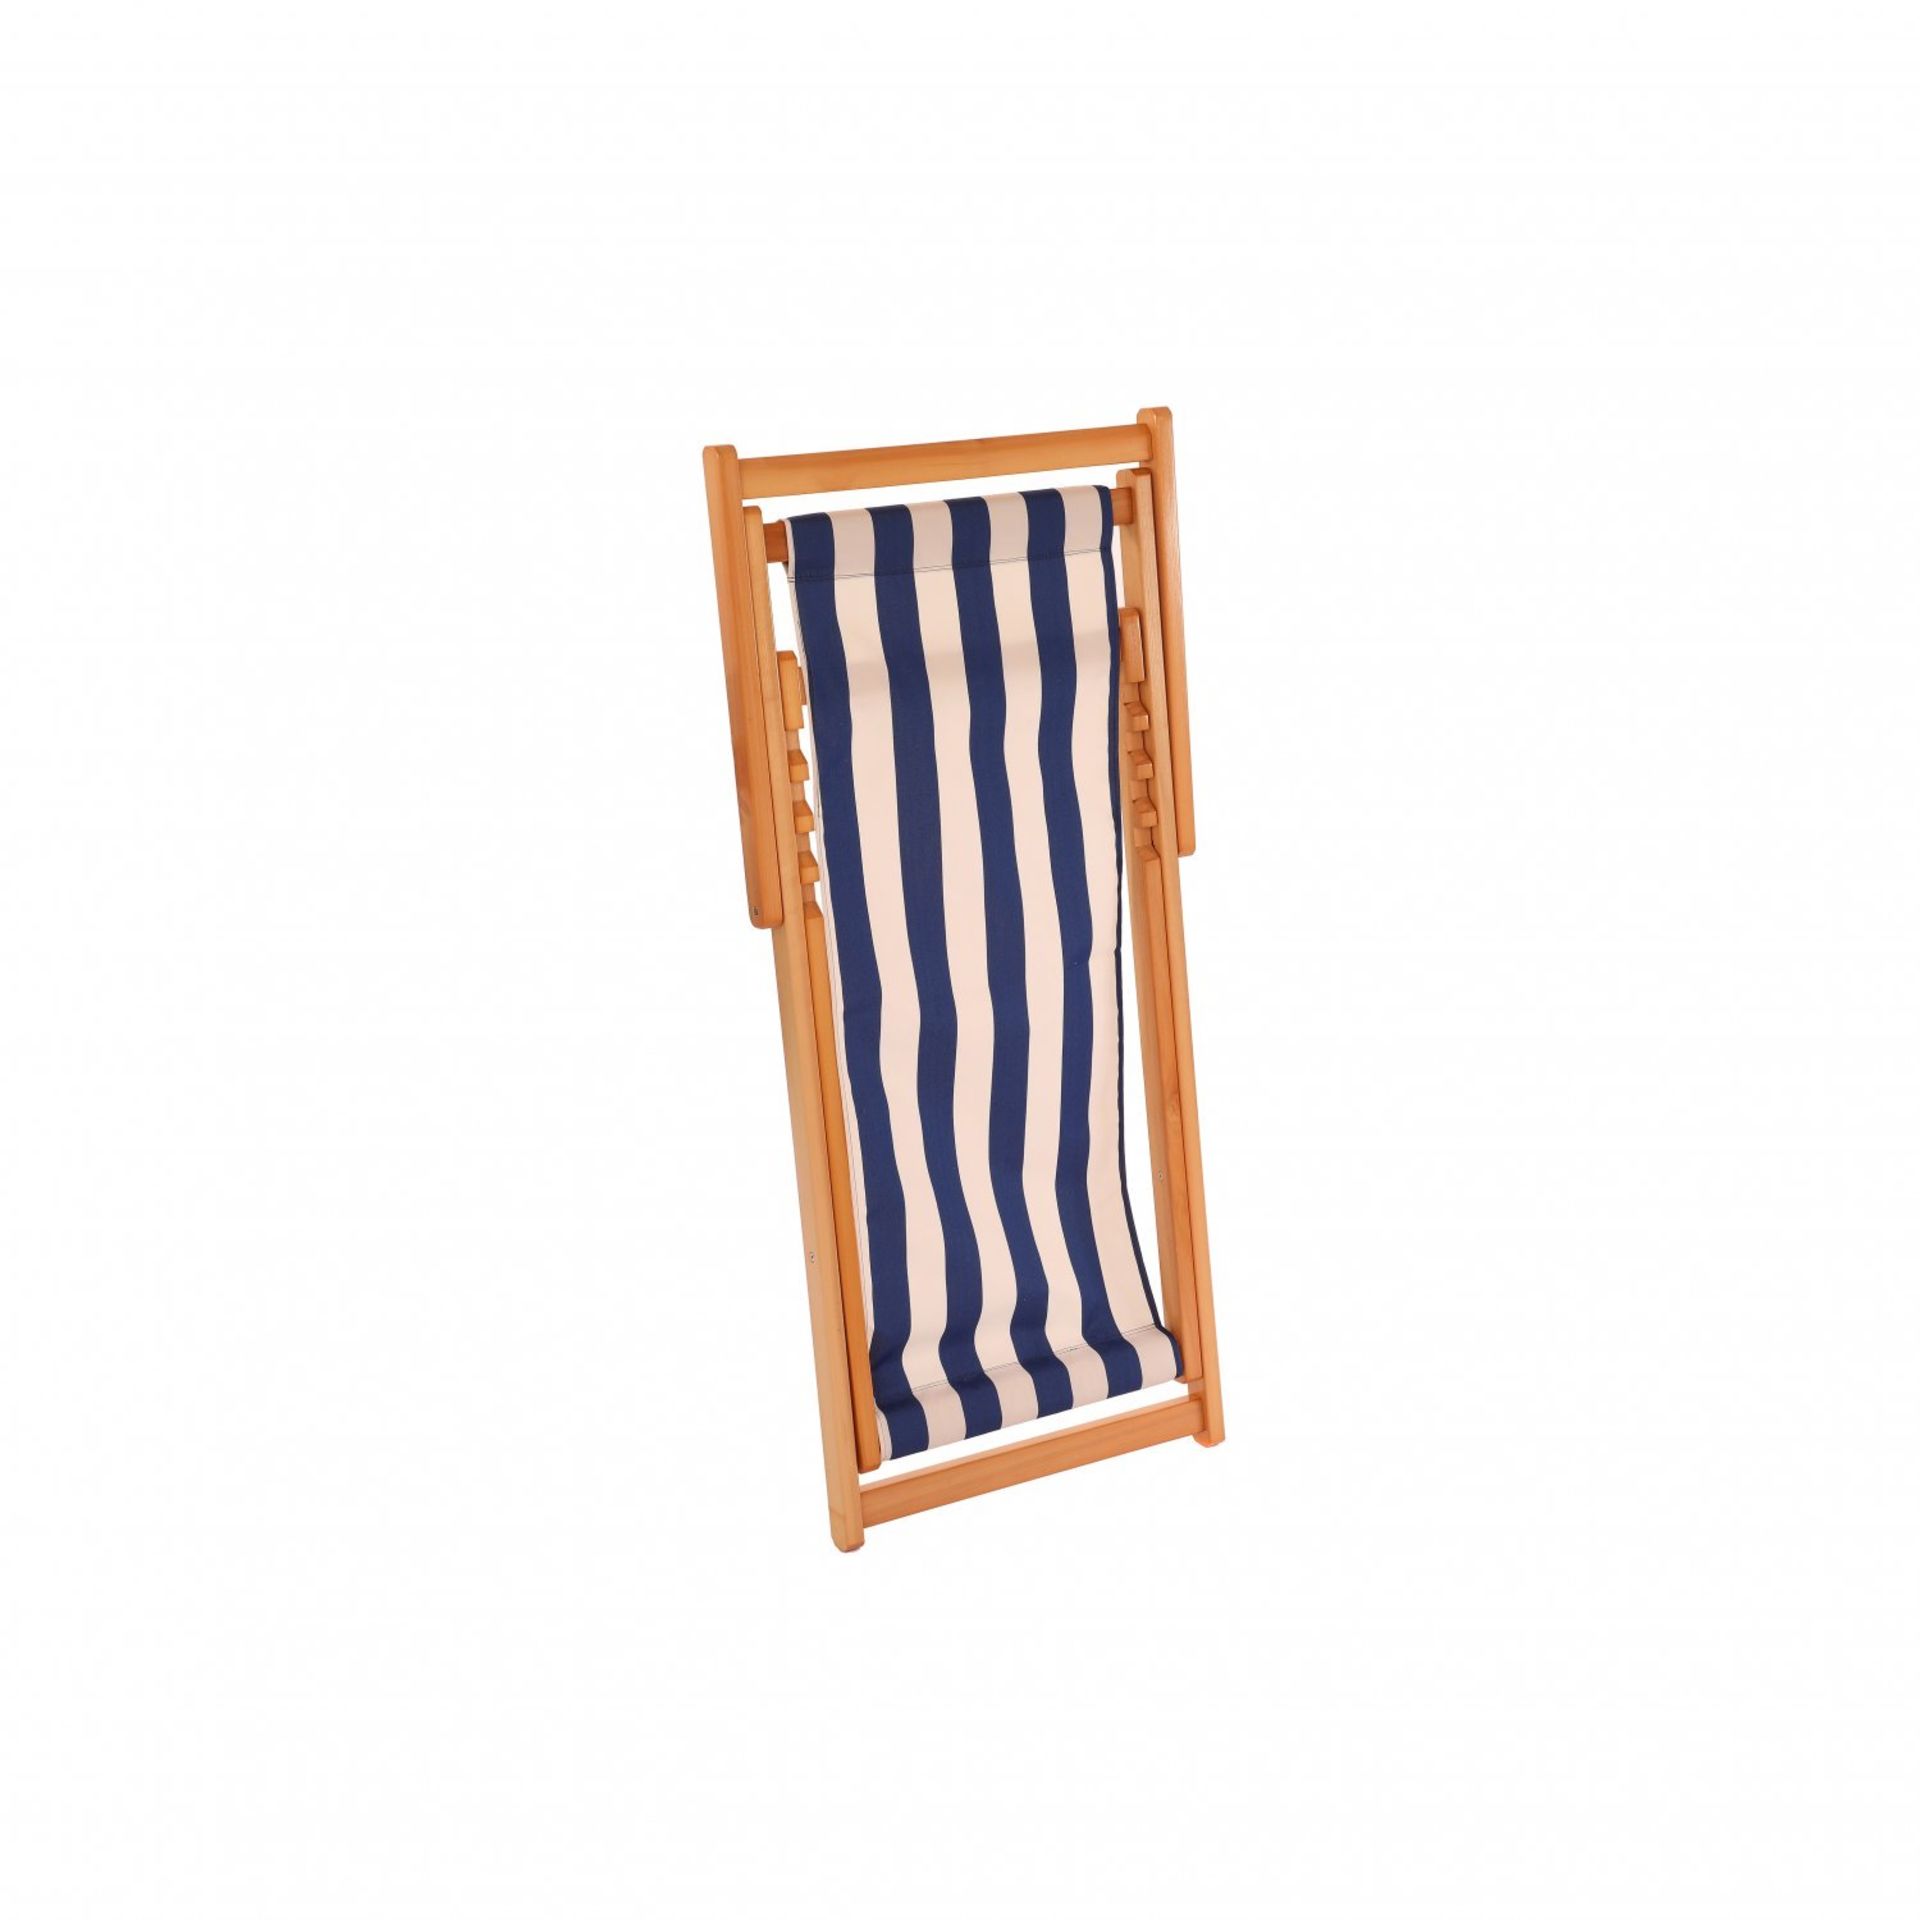 (F5) Traditional Folding Hardwood Garden Beach Deck Chairs Deckchairs Folded measurements: 1... - Image 2 of 2